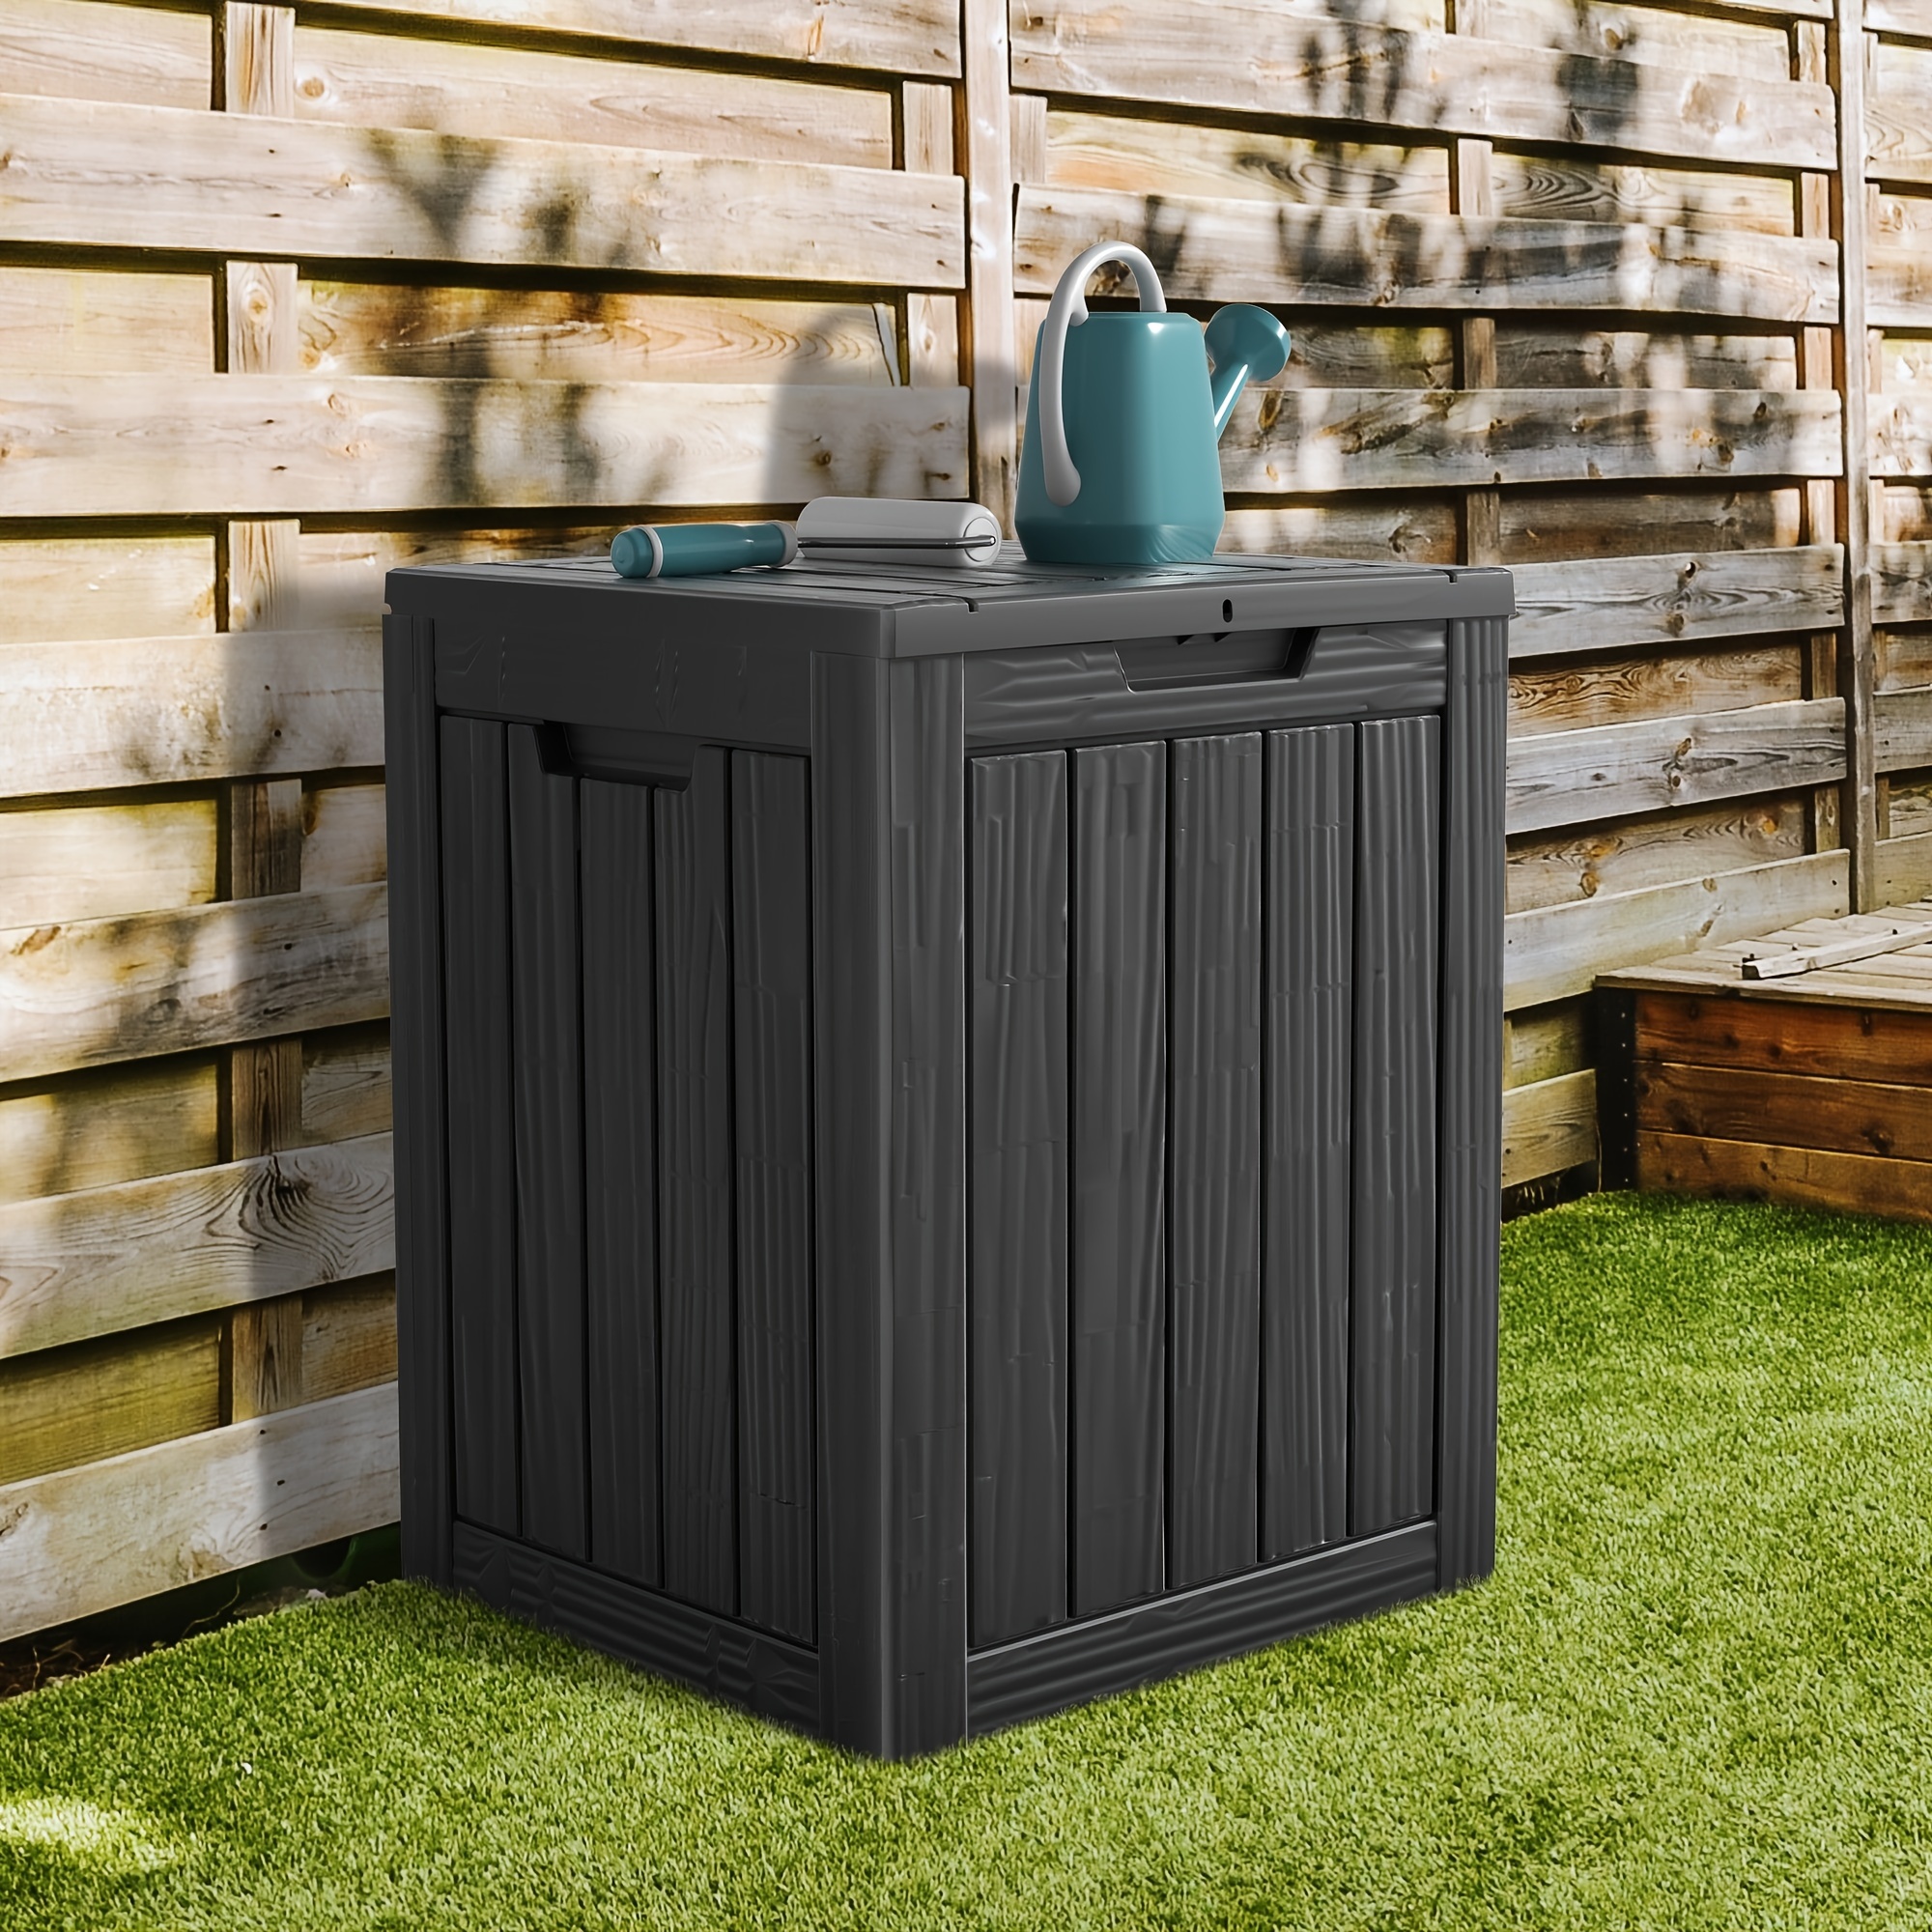 

28 Gallon Outdoor Storage Box Deck Box | Weather-resistant Patio Storage Cabinet For Kitchen, Pool Toys, Gardening Tools And More - Black